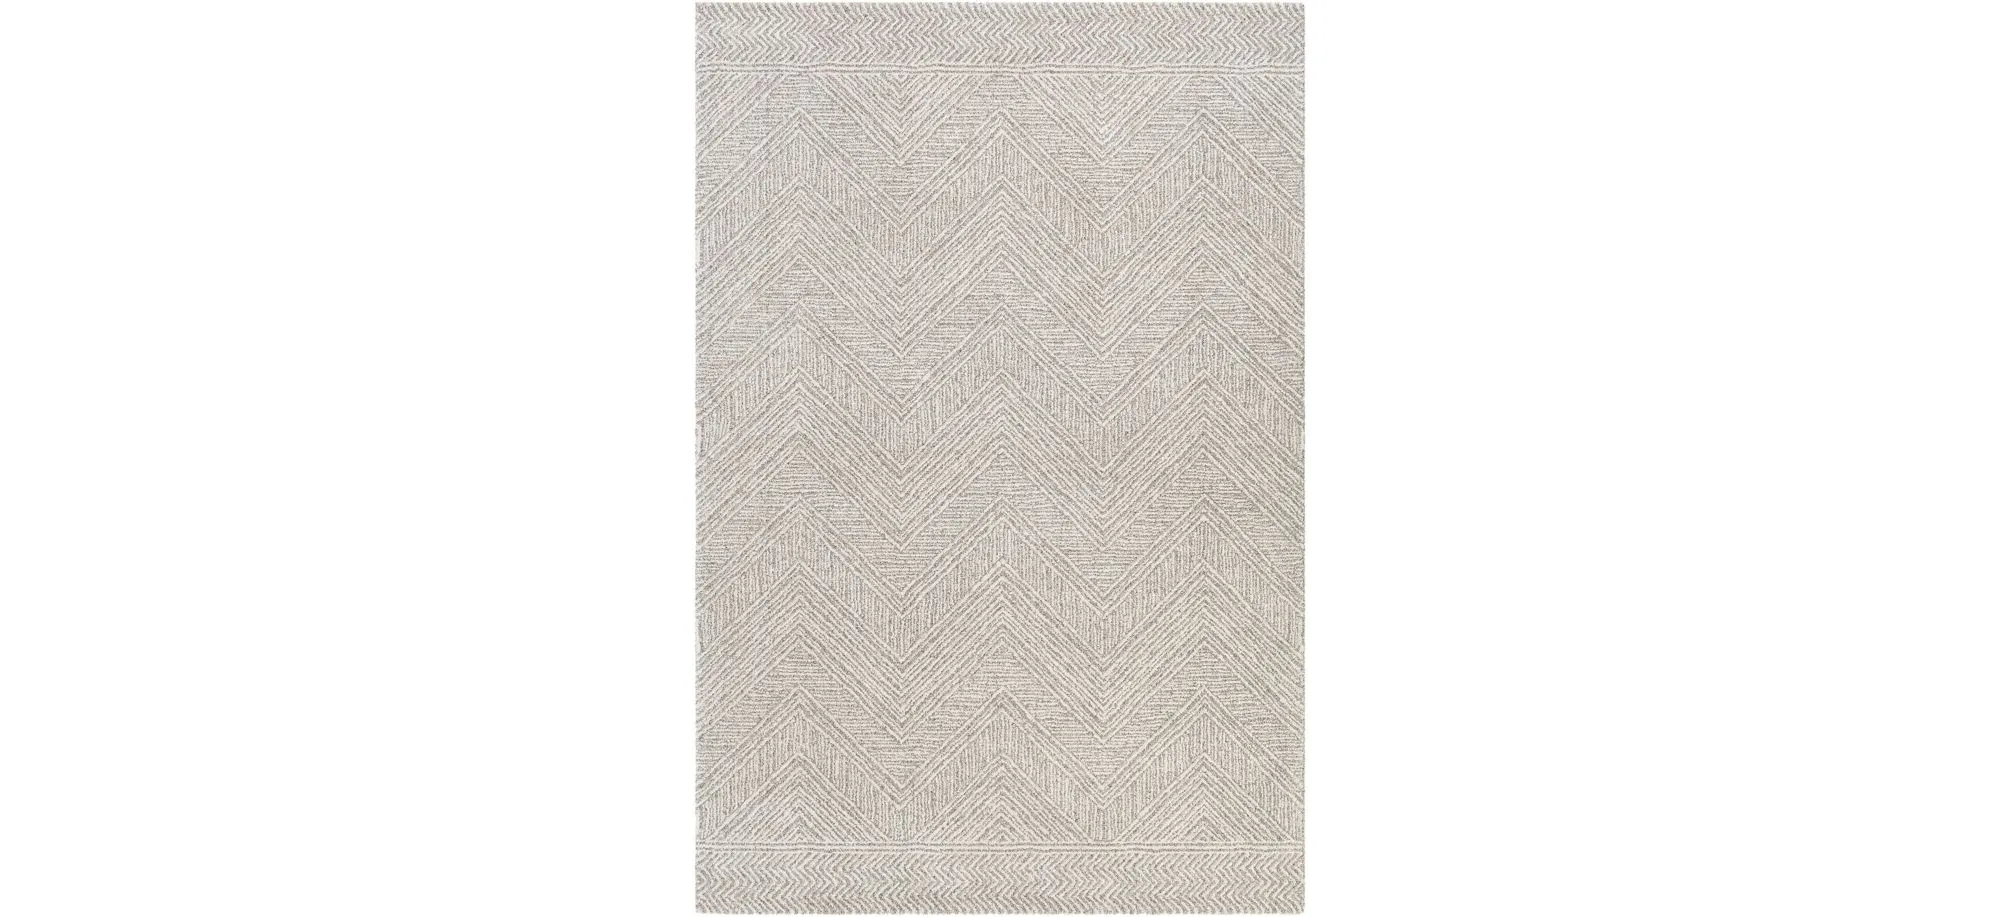 Gavic Rug in Silver Gray, Beige, Charcoal by Surya